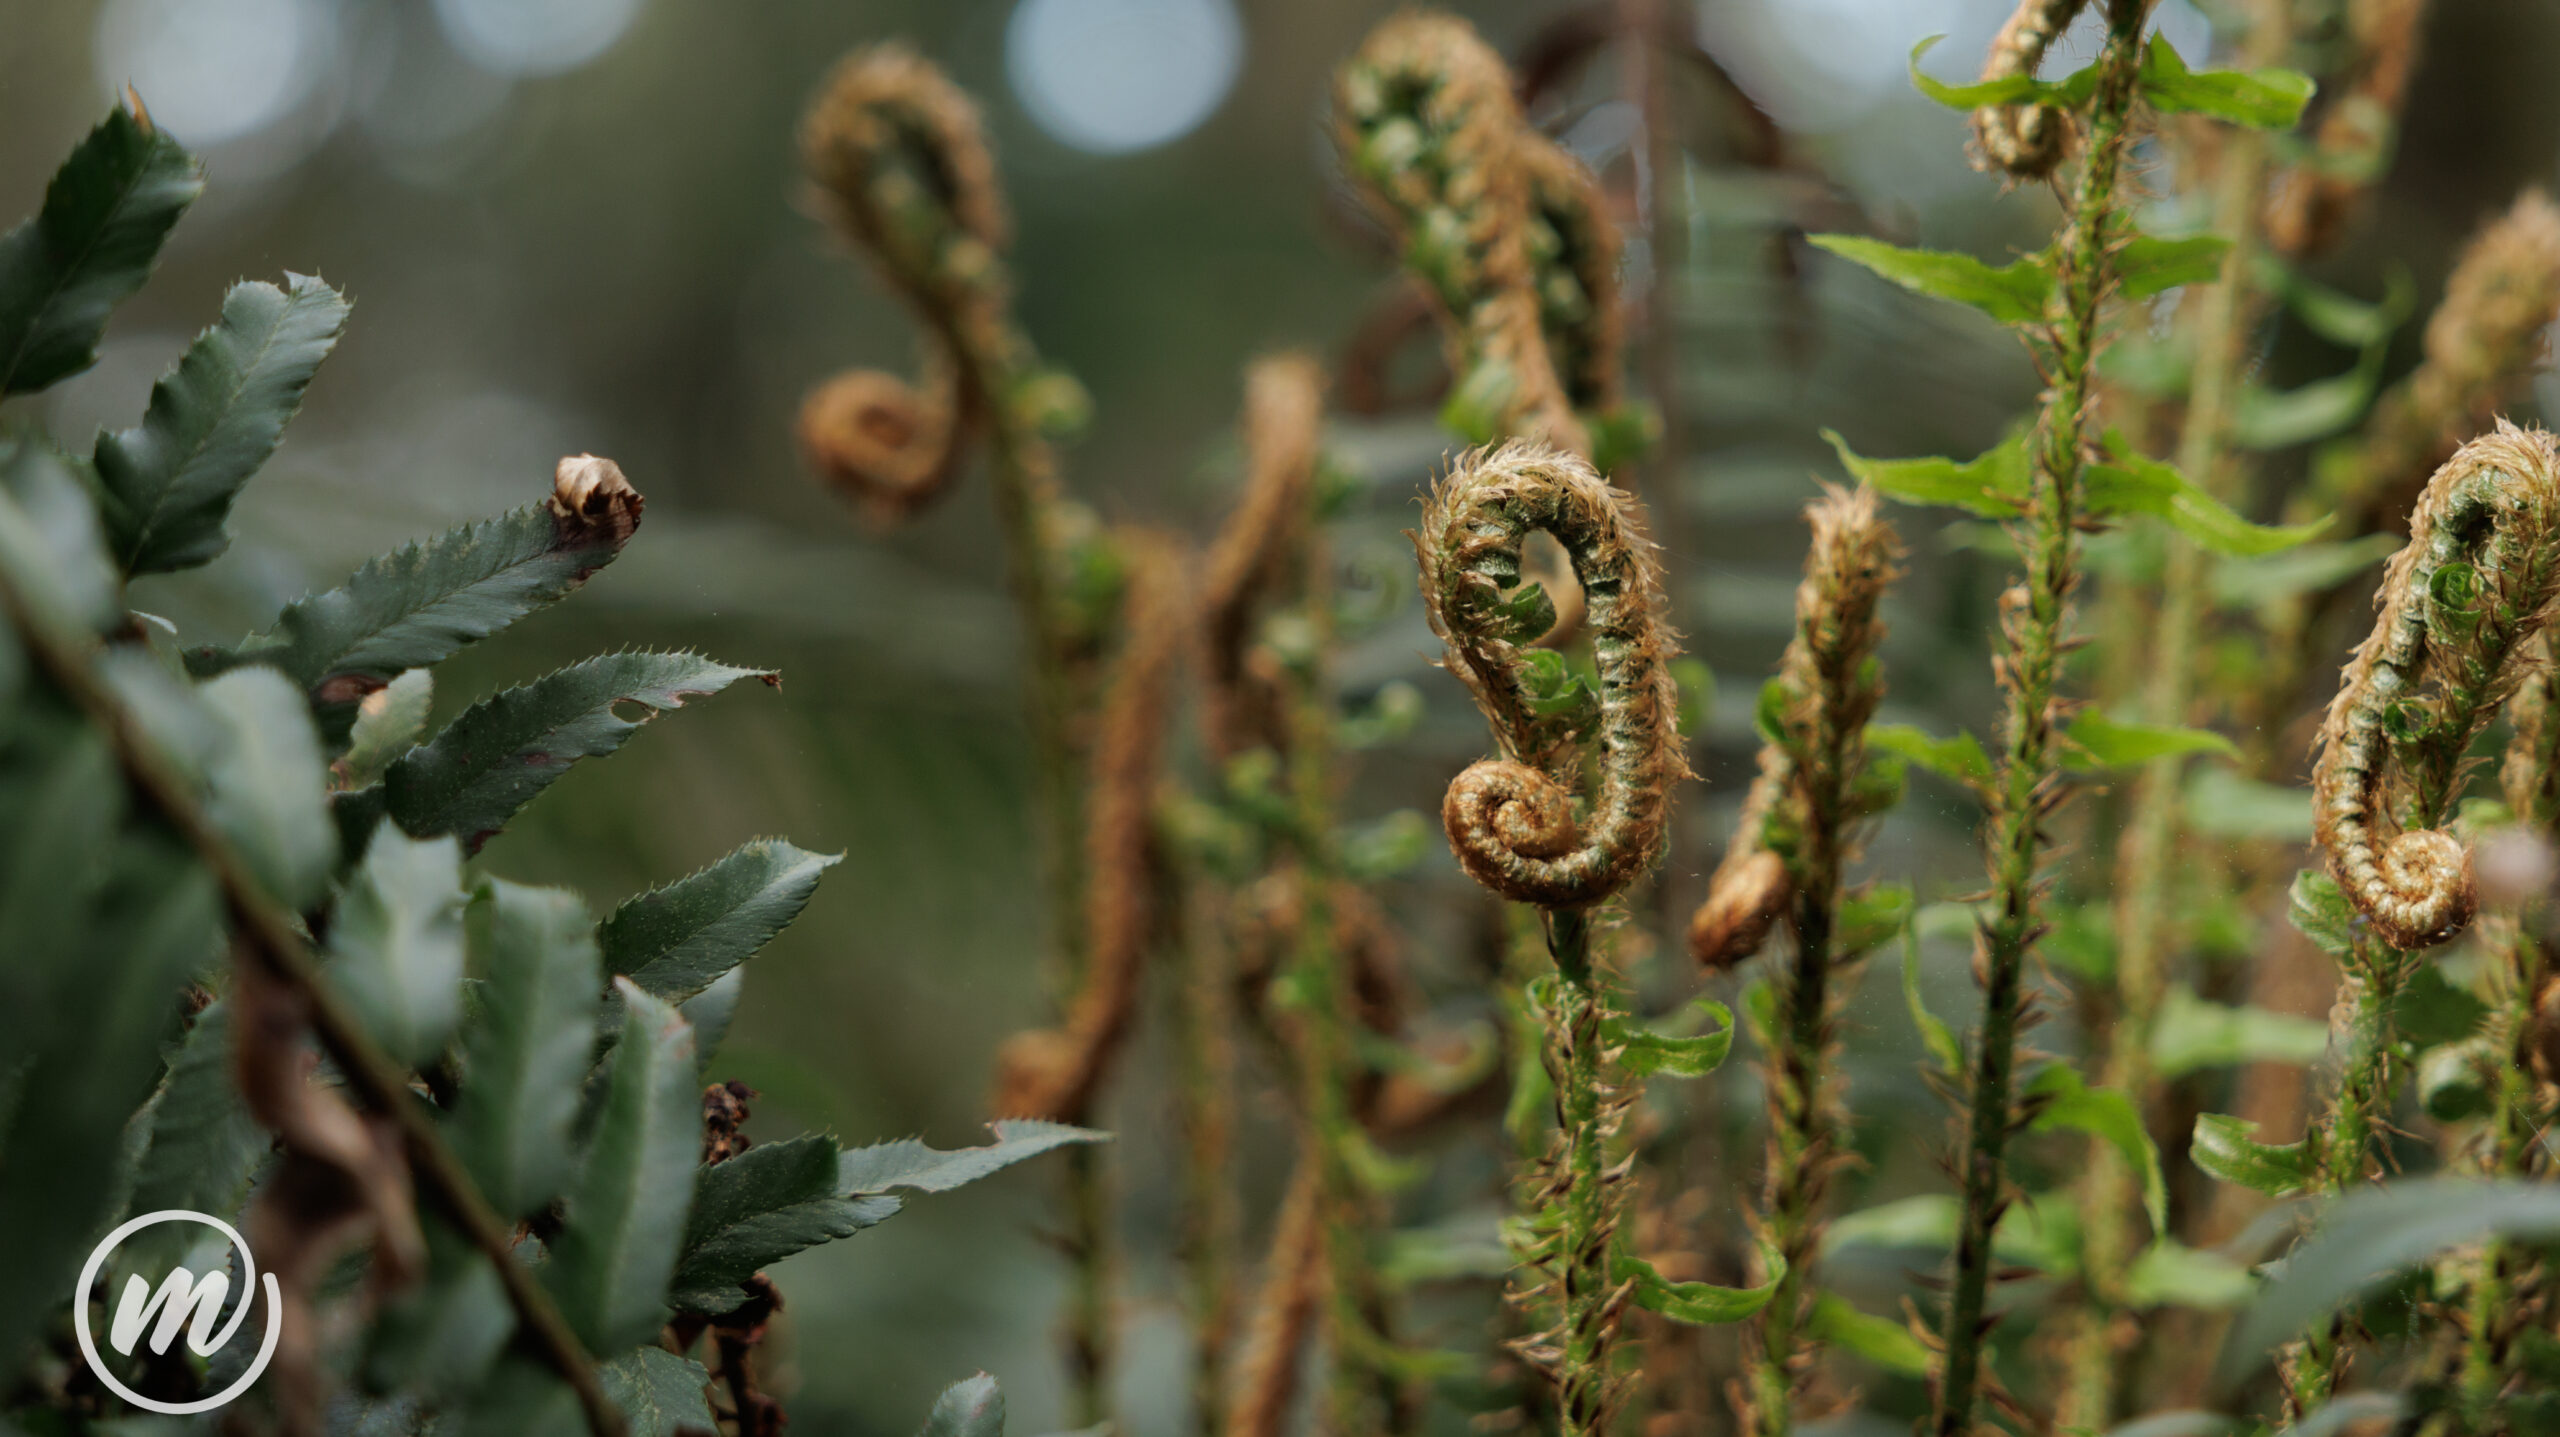 Fern fiddleheads at Price Sculpture Forest - photo by Marie Wilson